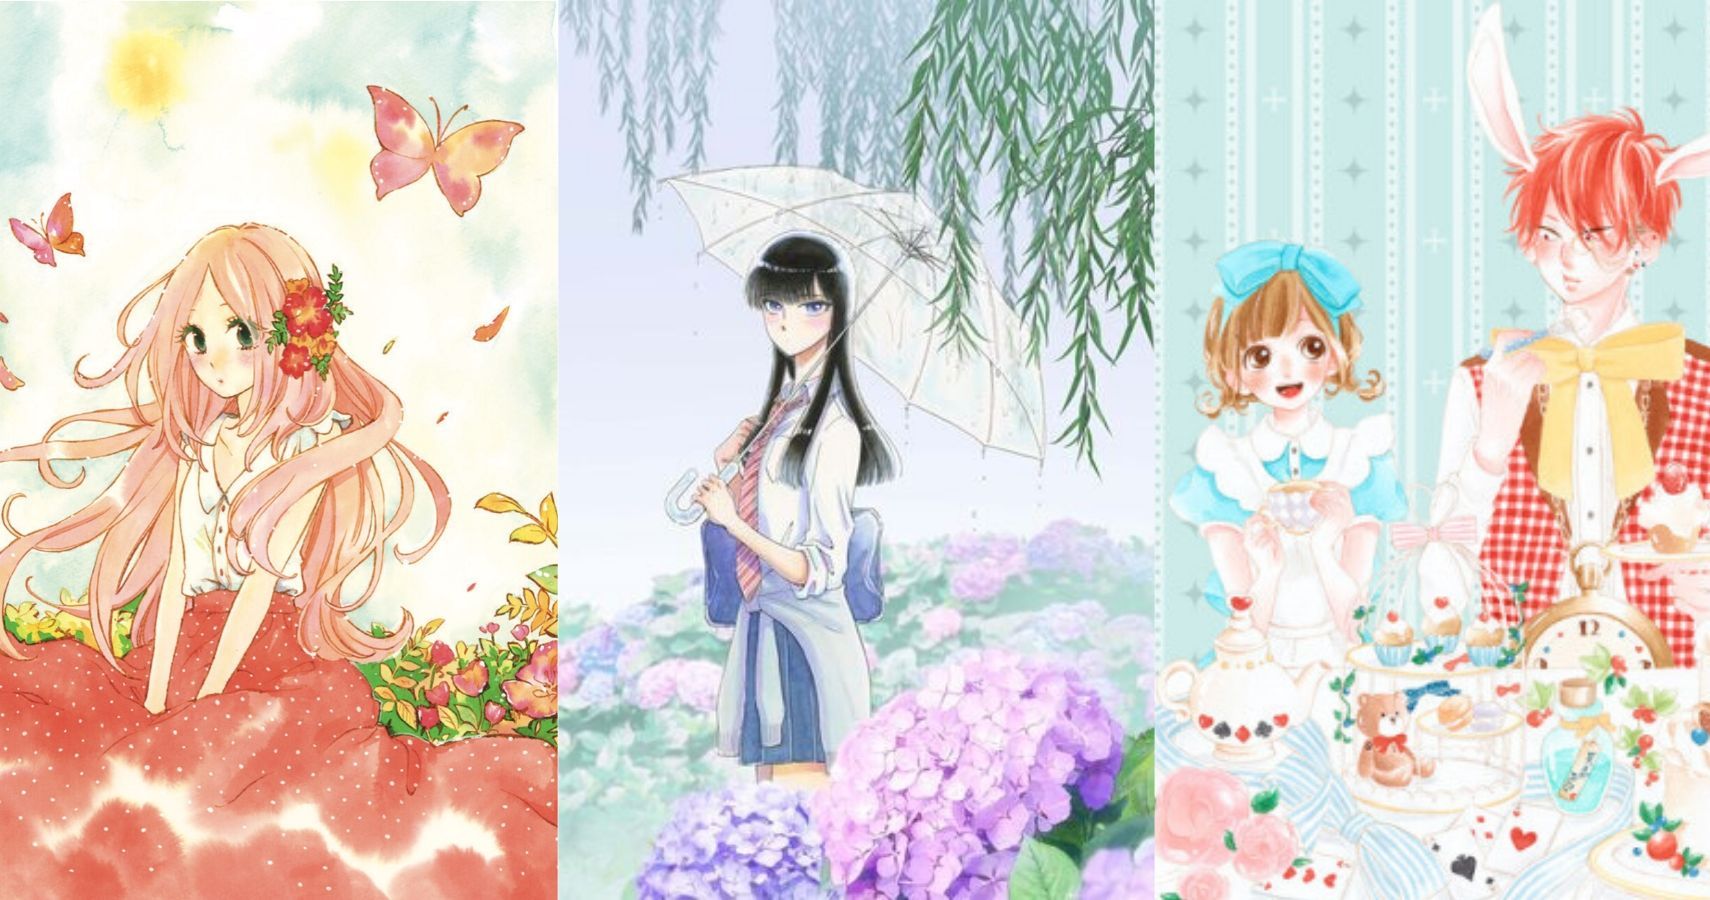 The 15 Greatest Romance Manga Of The Decade (According To GoodReads)